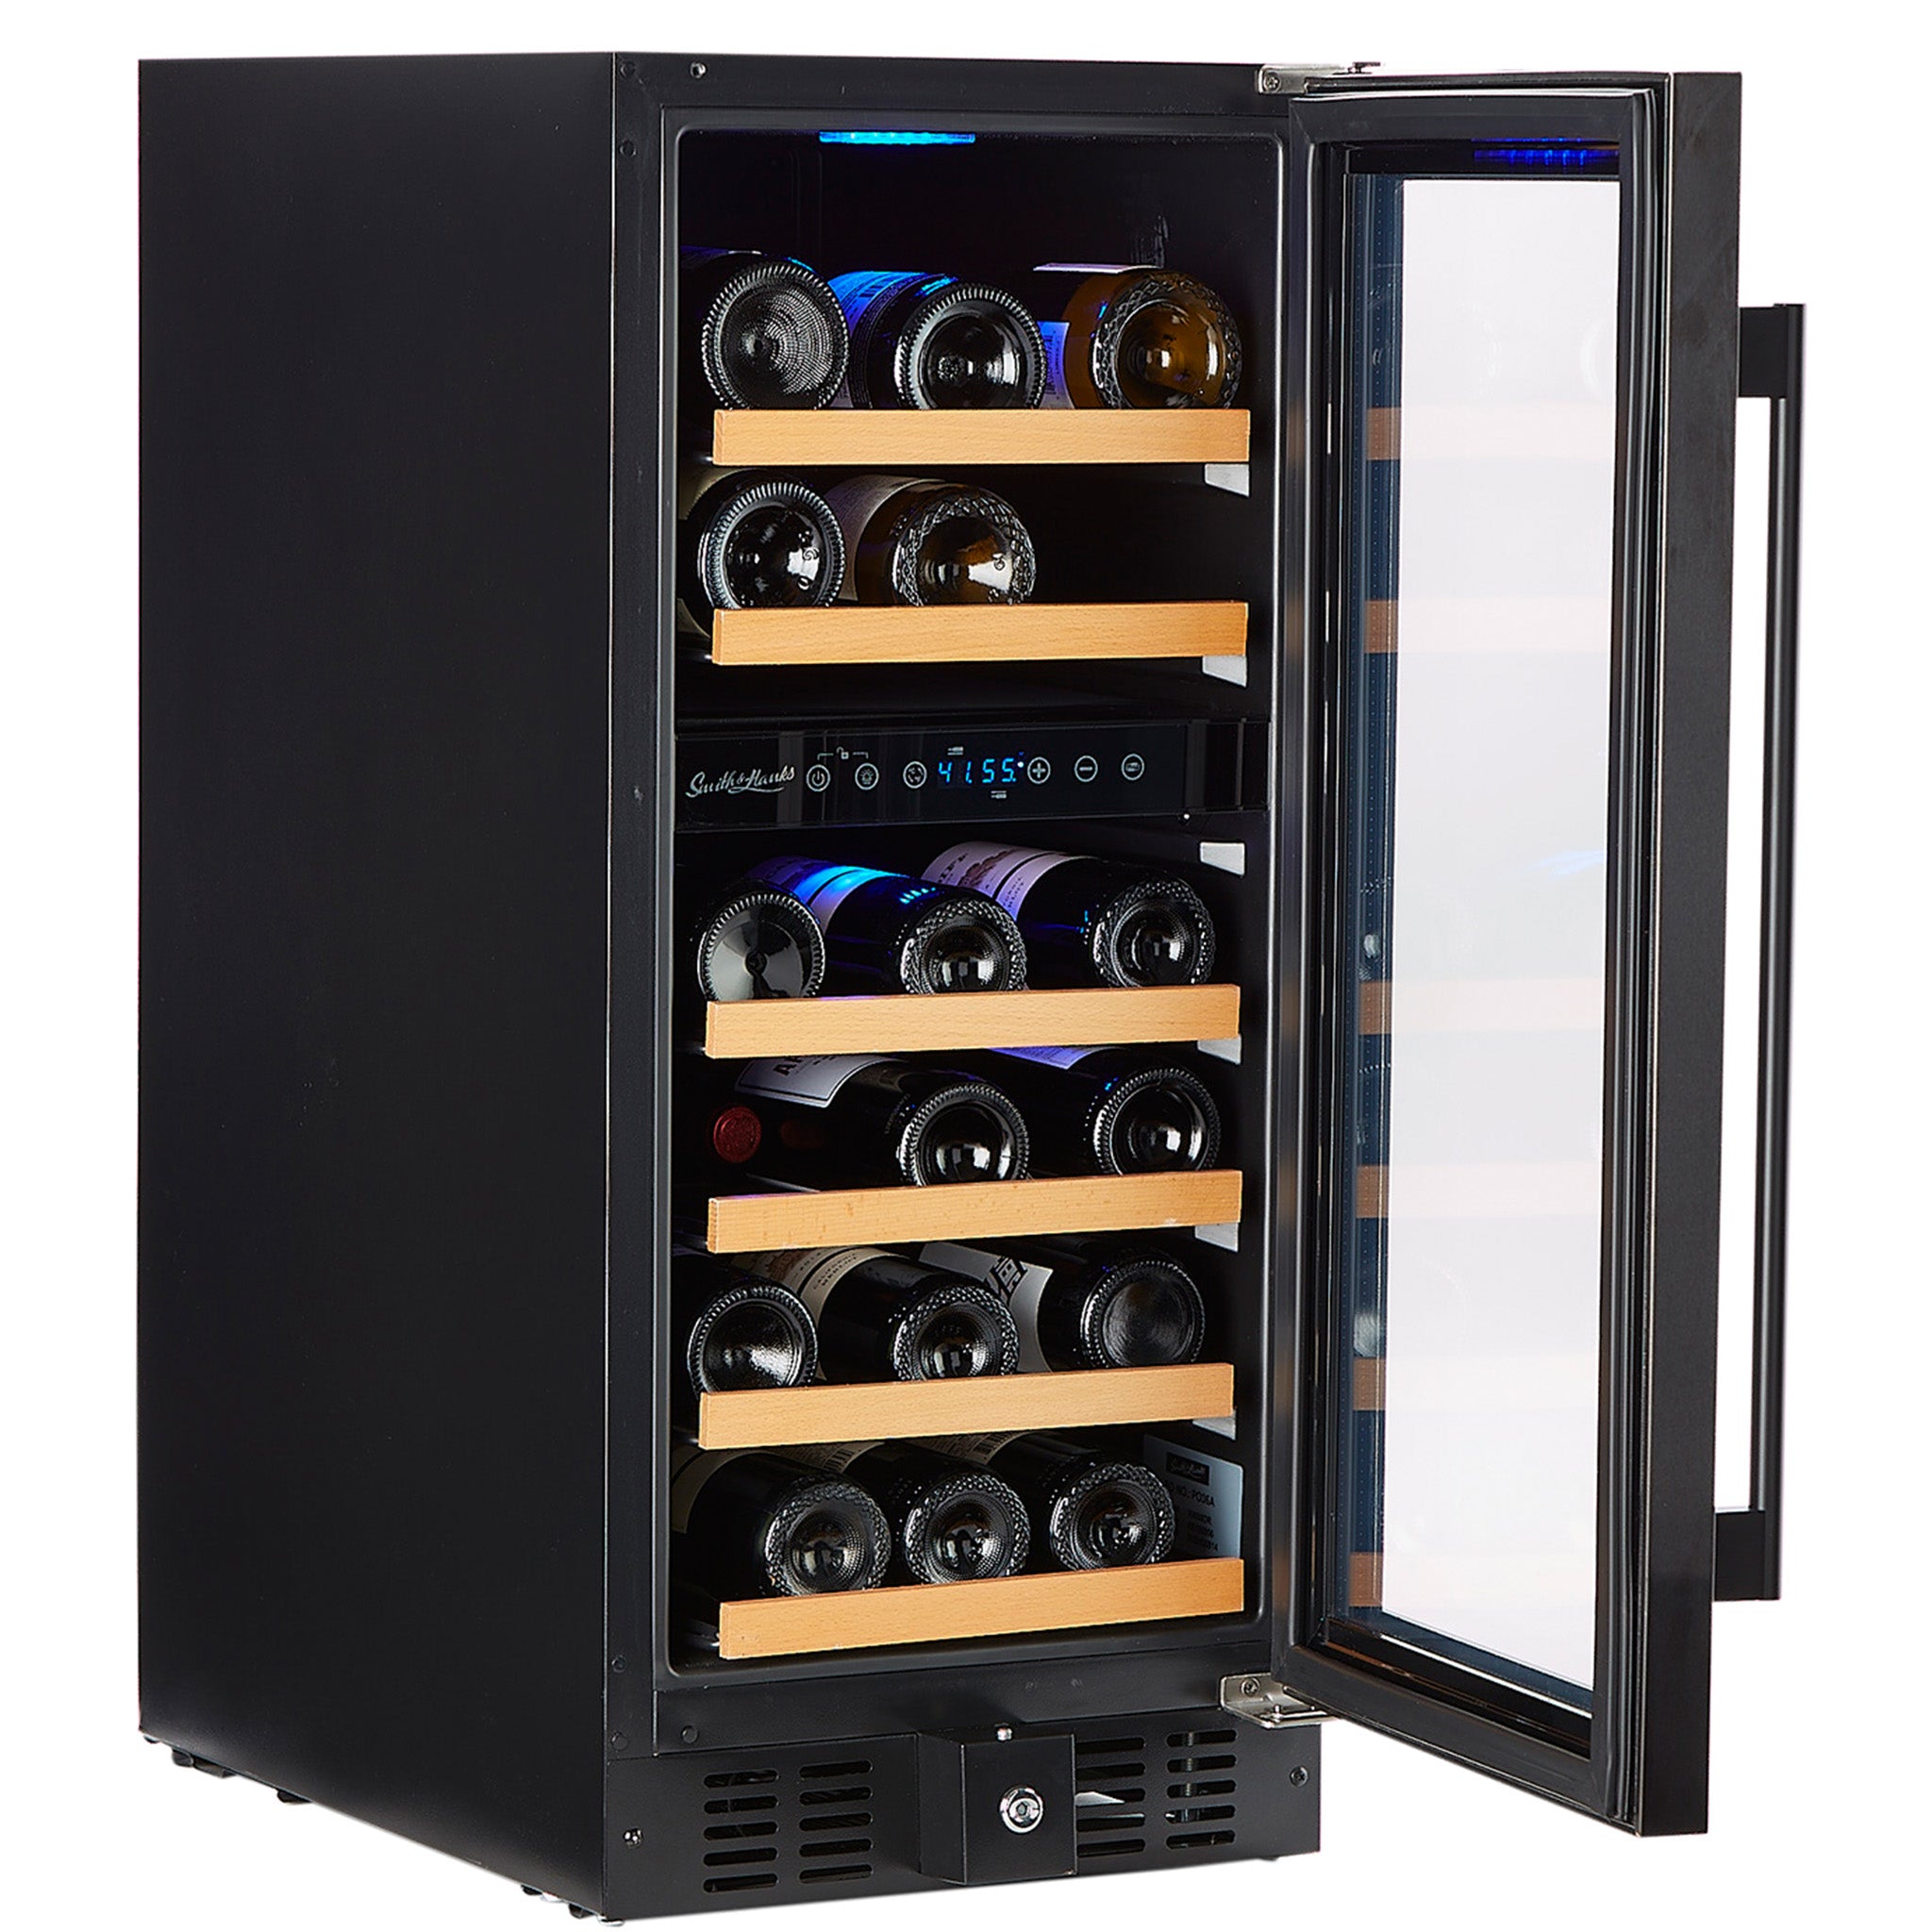 Smith & Hanks - 15" 32 Bottle Dual Zone Black Stainless Steel Under Counter Wine Cooler (RE55006)